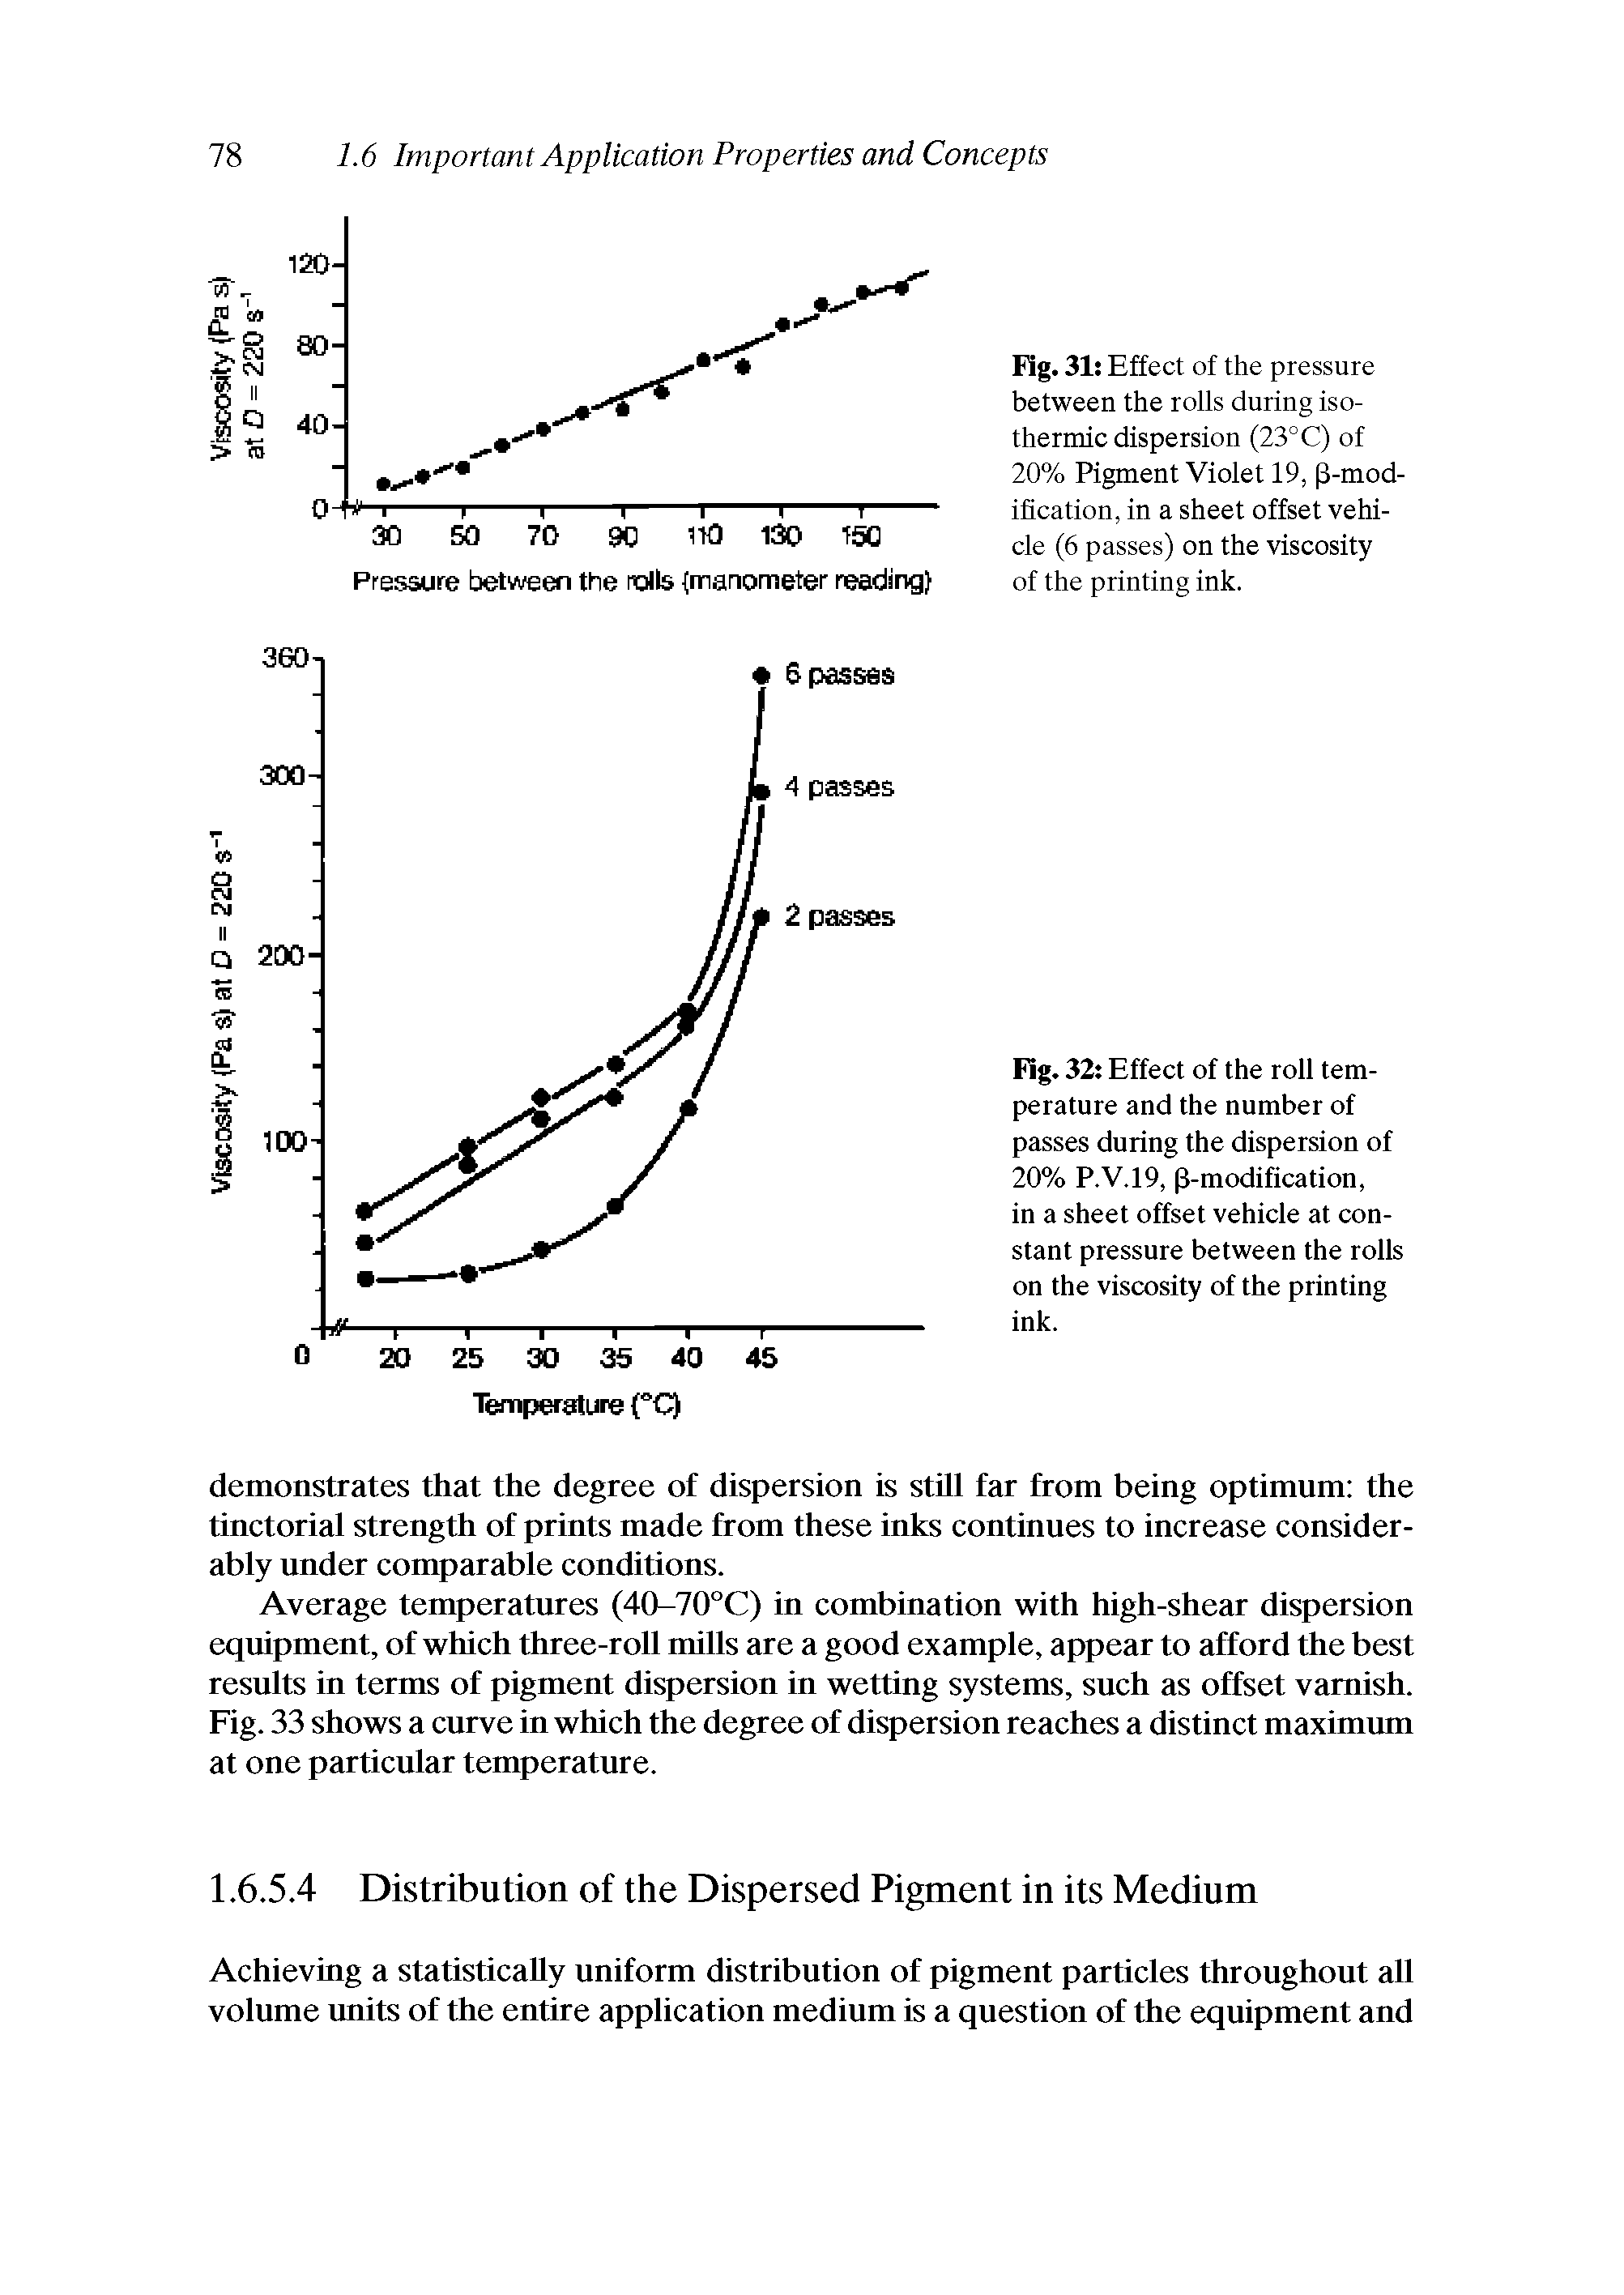 Fig. 32 Effect of the roll temperature and the number of passes during the dispersion of 20% P.V.19, (3-modification, in a sheet offset vehicle at constant pressure between the rolls on the viscosity of the printing ink.